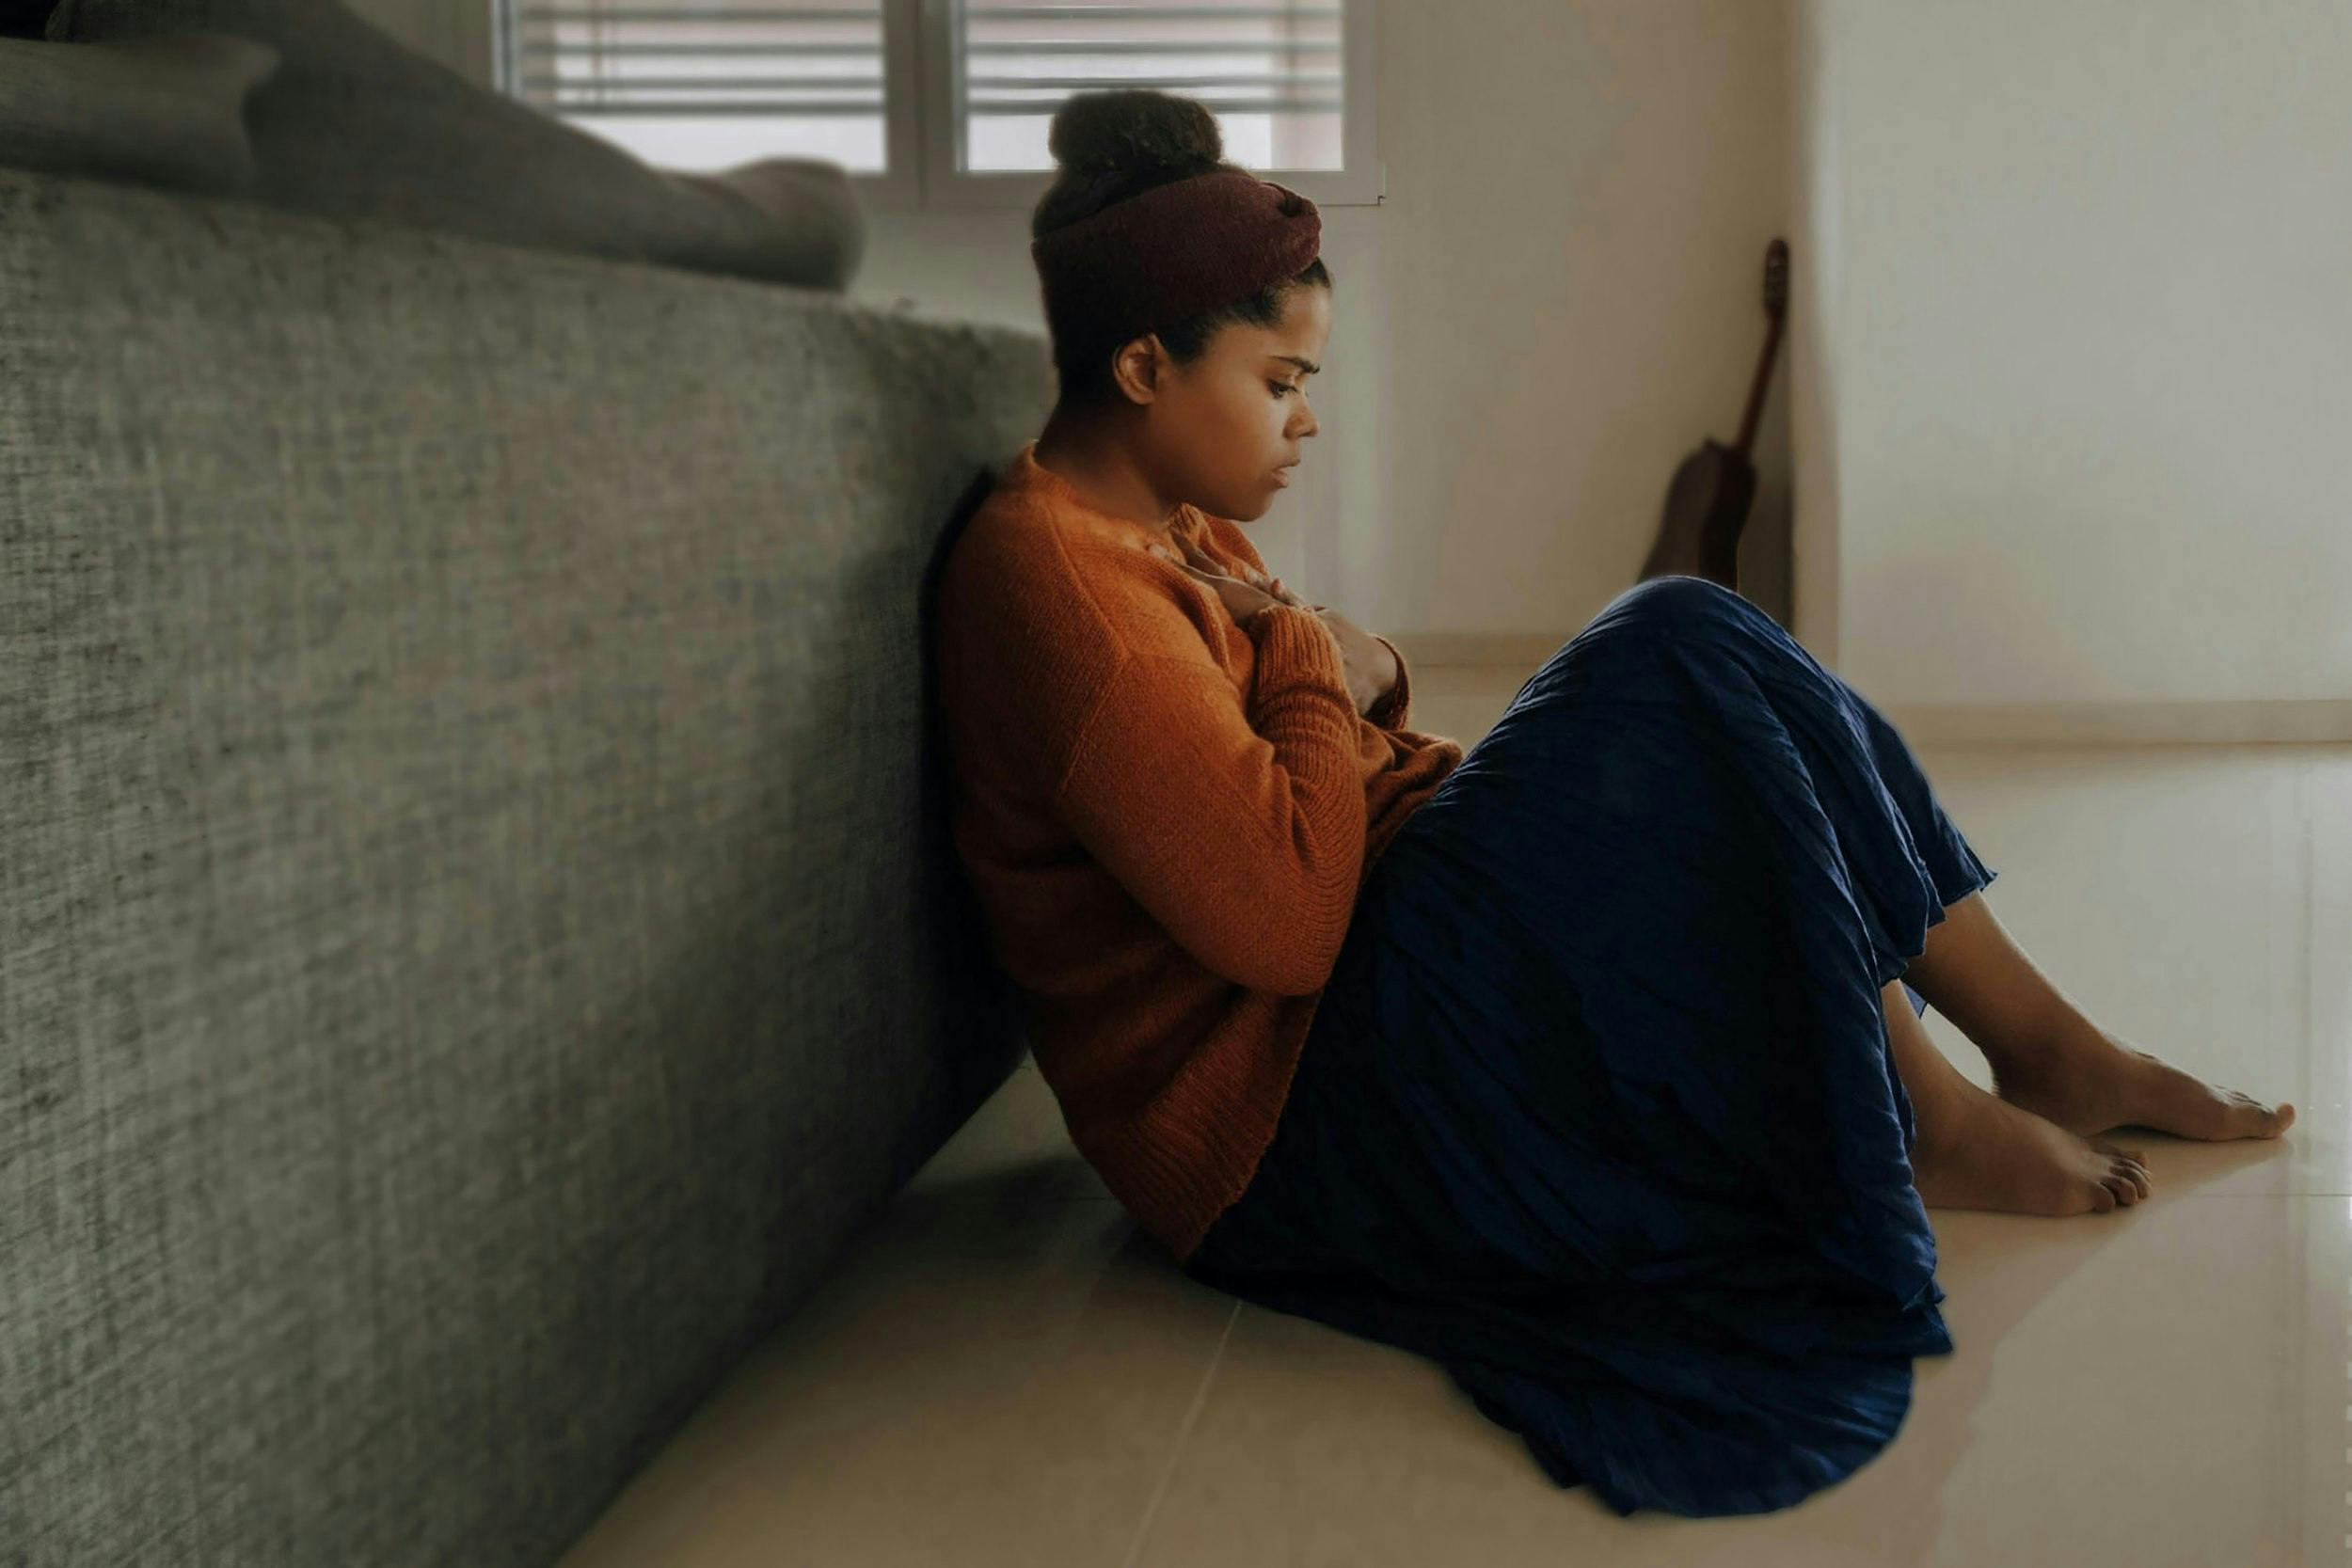 A dark-skinned woman sitting on the floor with her back leaning against a couch bringing her hand to her chest as a sign of concern.